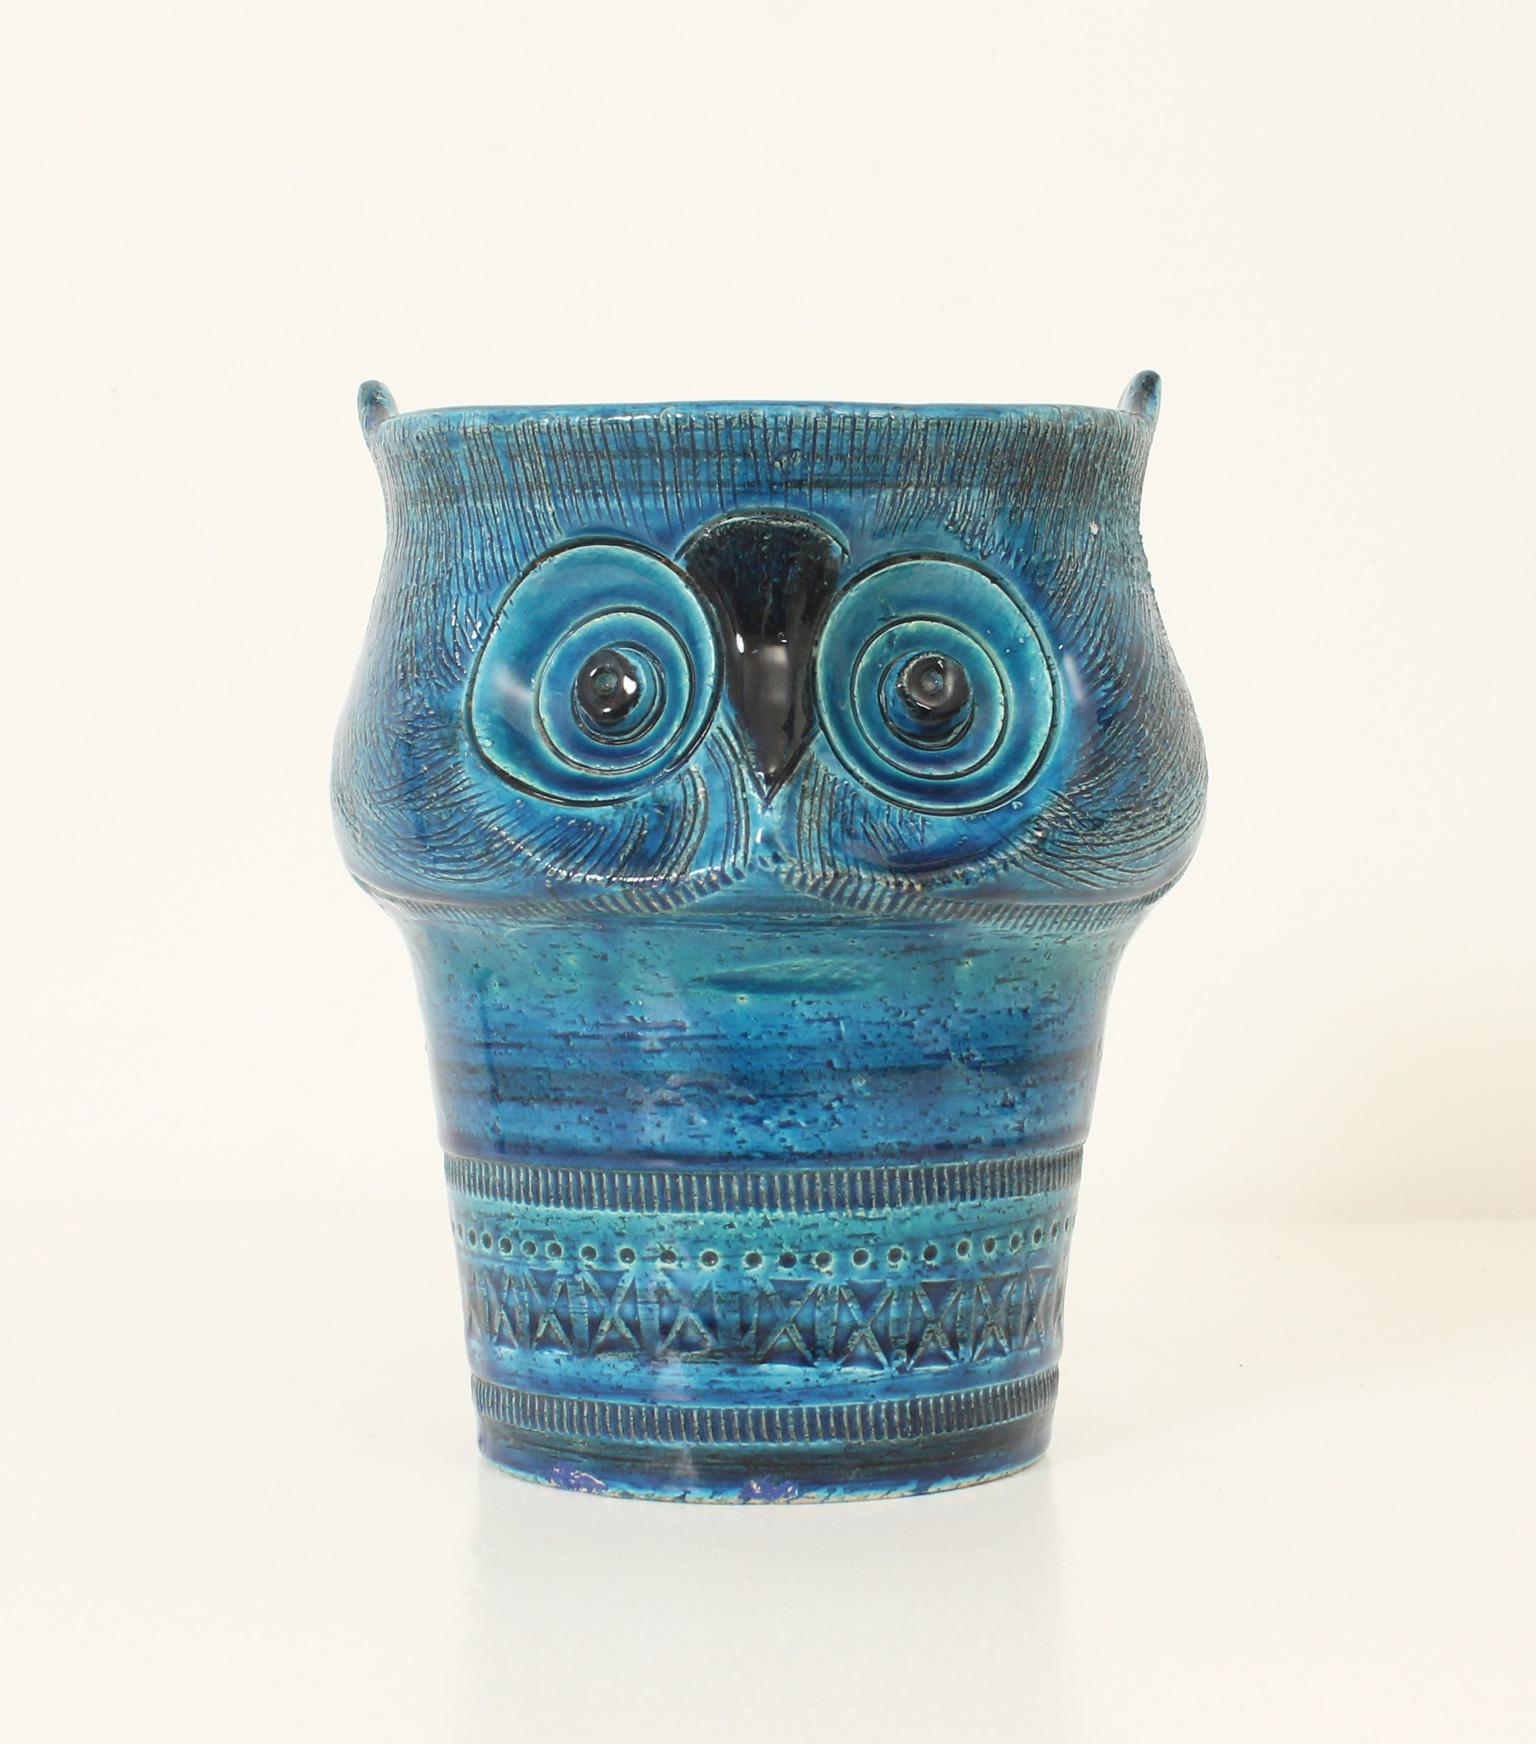 Ceramic owl by Aldo Londi as part of the Blue Rimini collection for Bitossi, Italy, 1960's. Blue and turquoise glazed ceramic with carved geometric design.